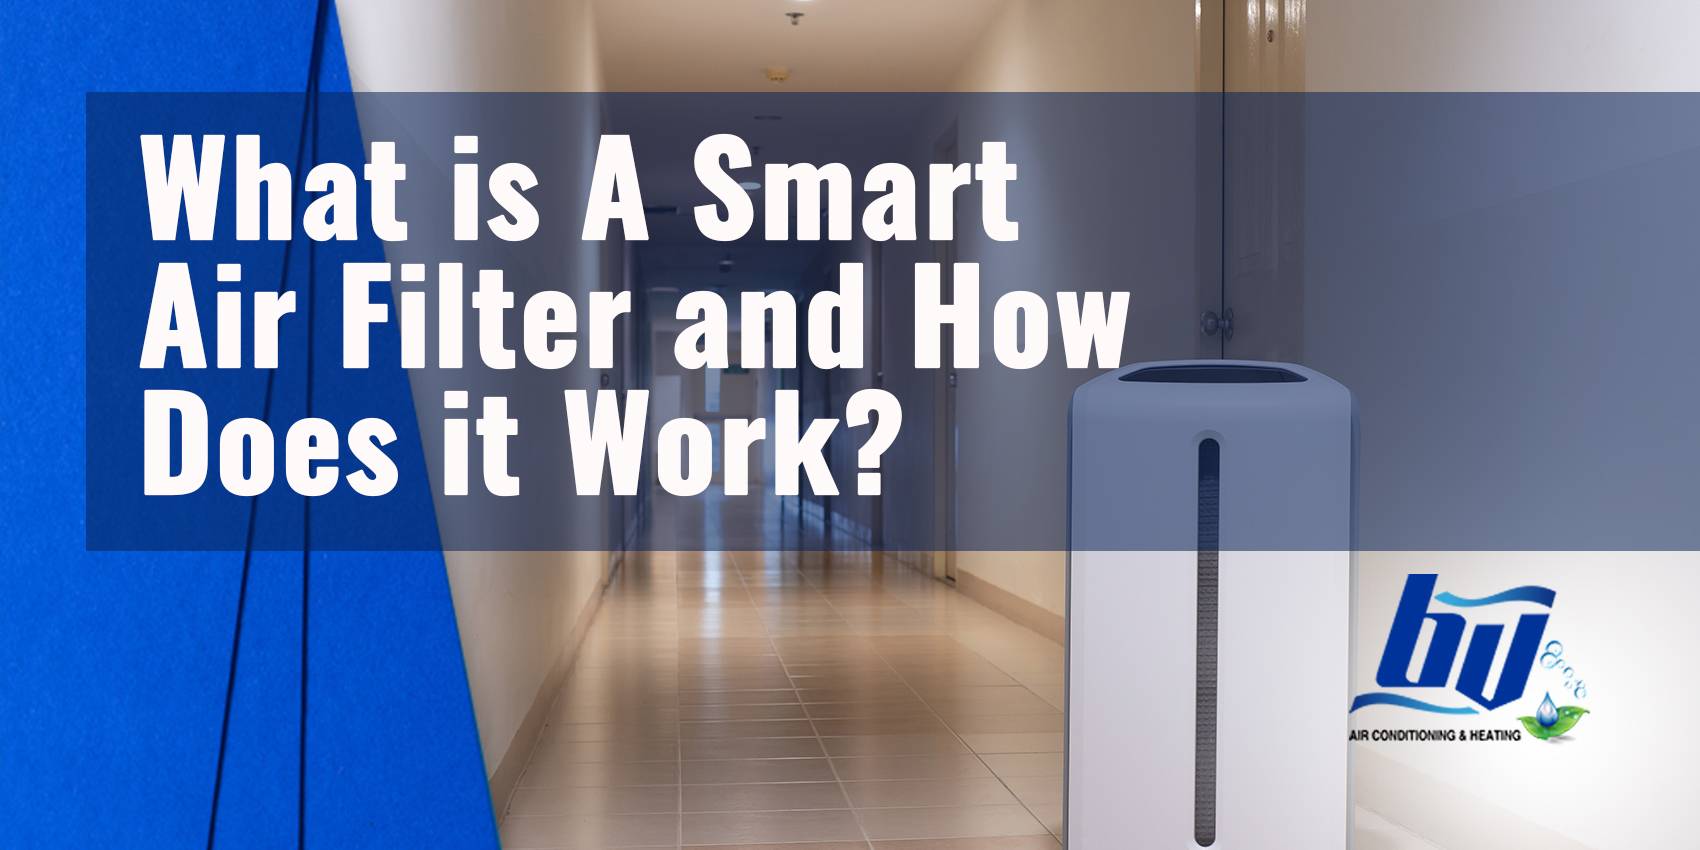 What Is a Smart Air Filter and How Does It Work? - Grand Prairie, TX